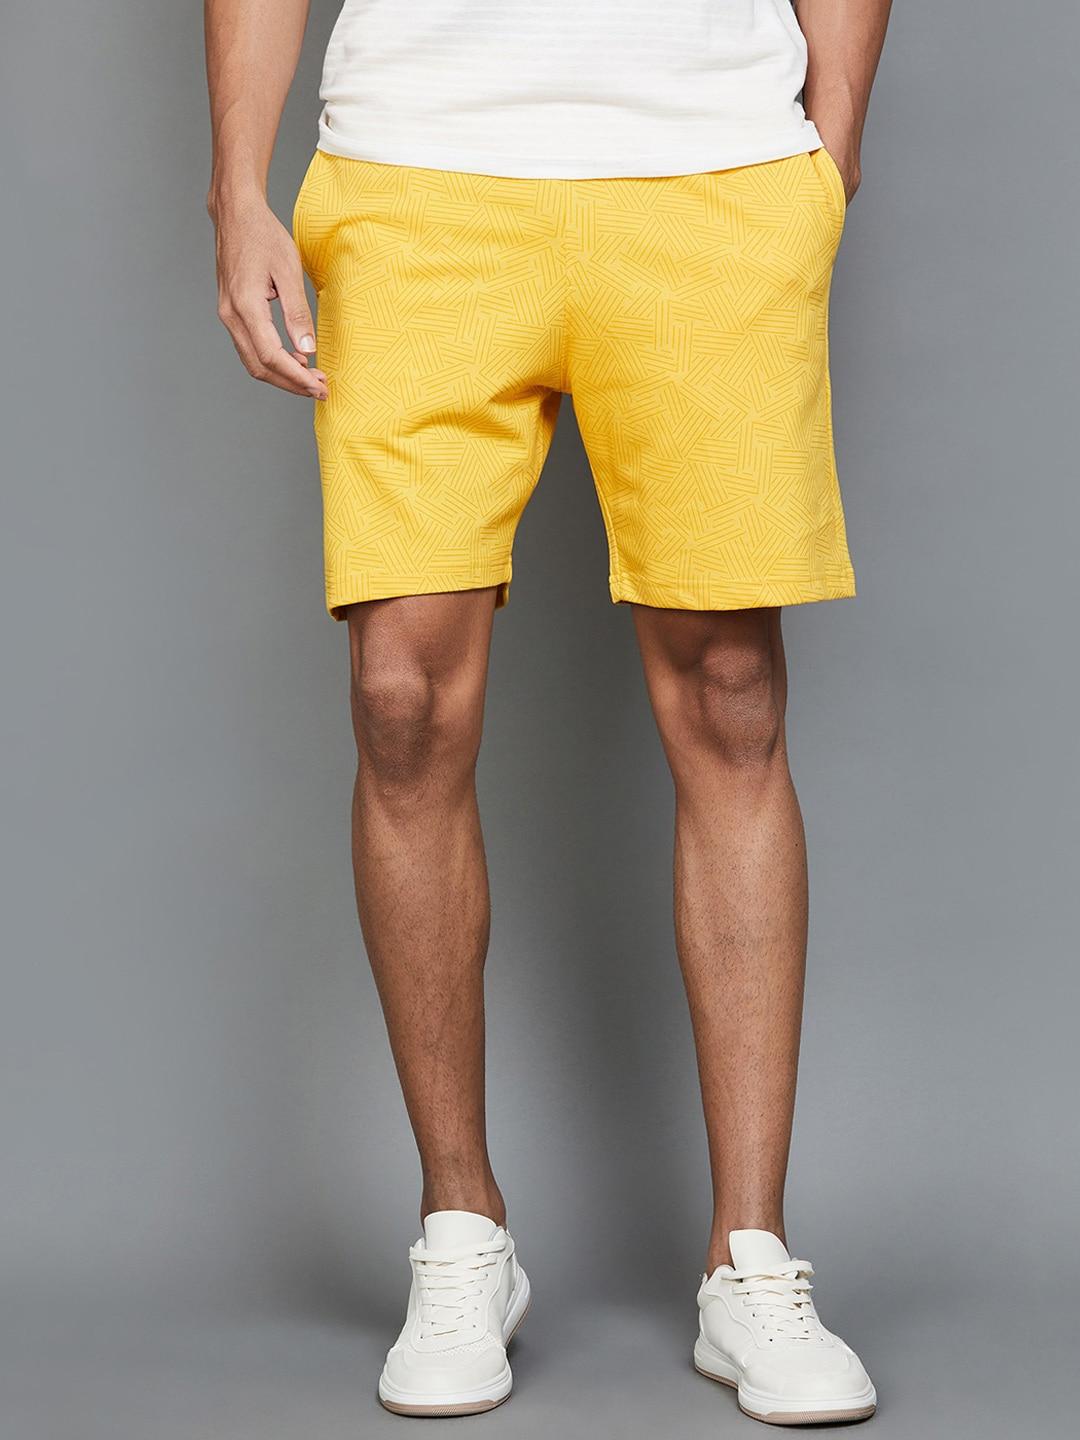 fame-forever-by-lifestyle-men-yellow-shorts